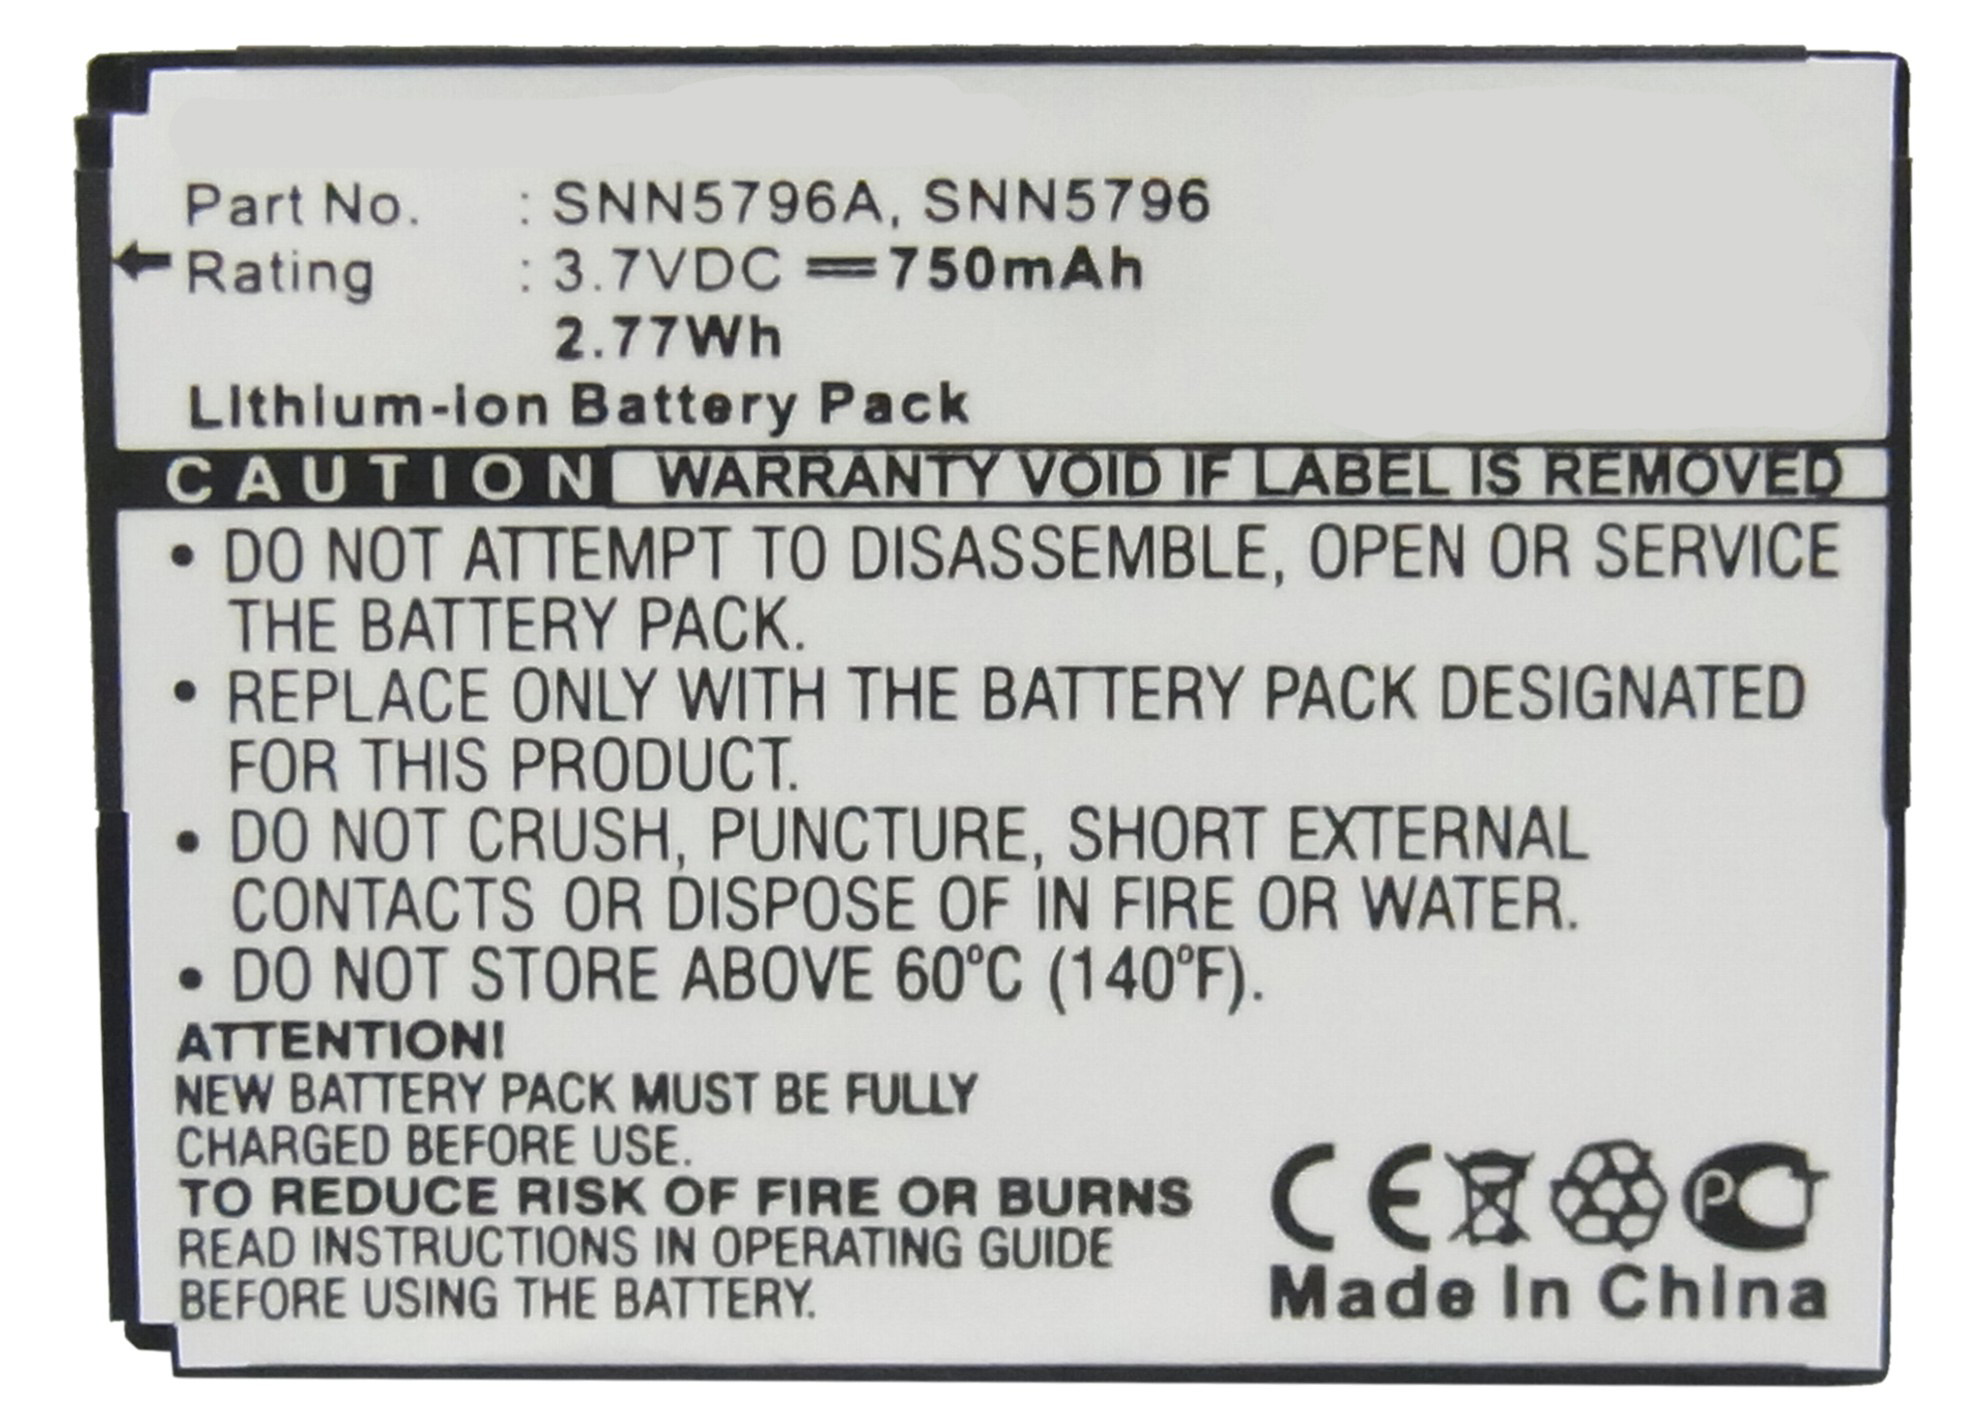 Synergy Digital Cell Phone Battery, Compatiable with Motorola BD50, SNN5796, SNN5796A Cell Phone Battery (3.7V, Li-ion, 750mAh)